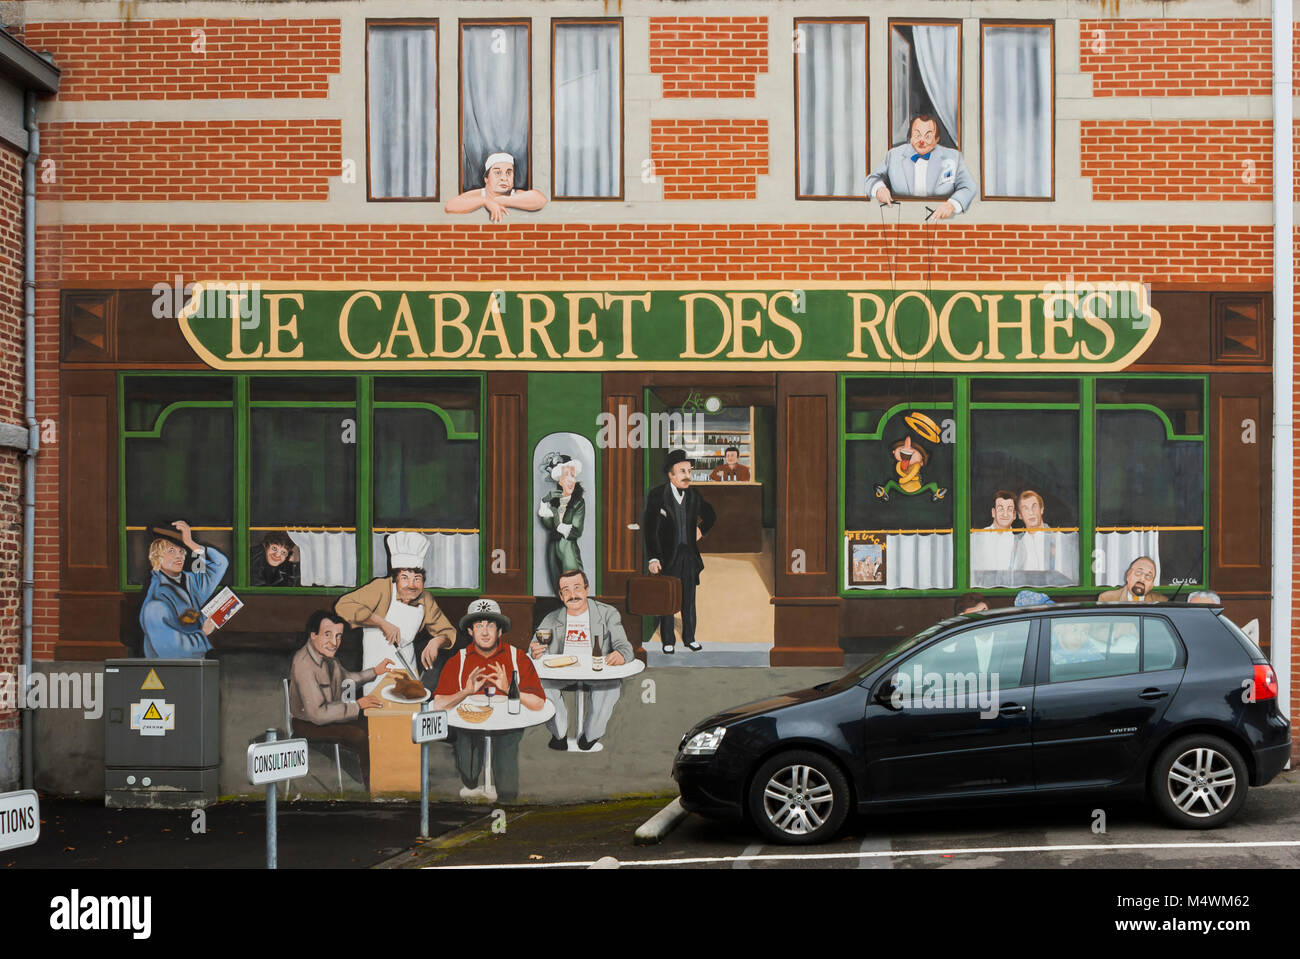 “Le Cabaret des Roches” mural in Rochefort, Belgium, depicting comedians that has marked the history of the “Festival du Rire”. Stock Photo